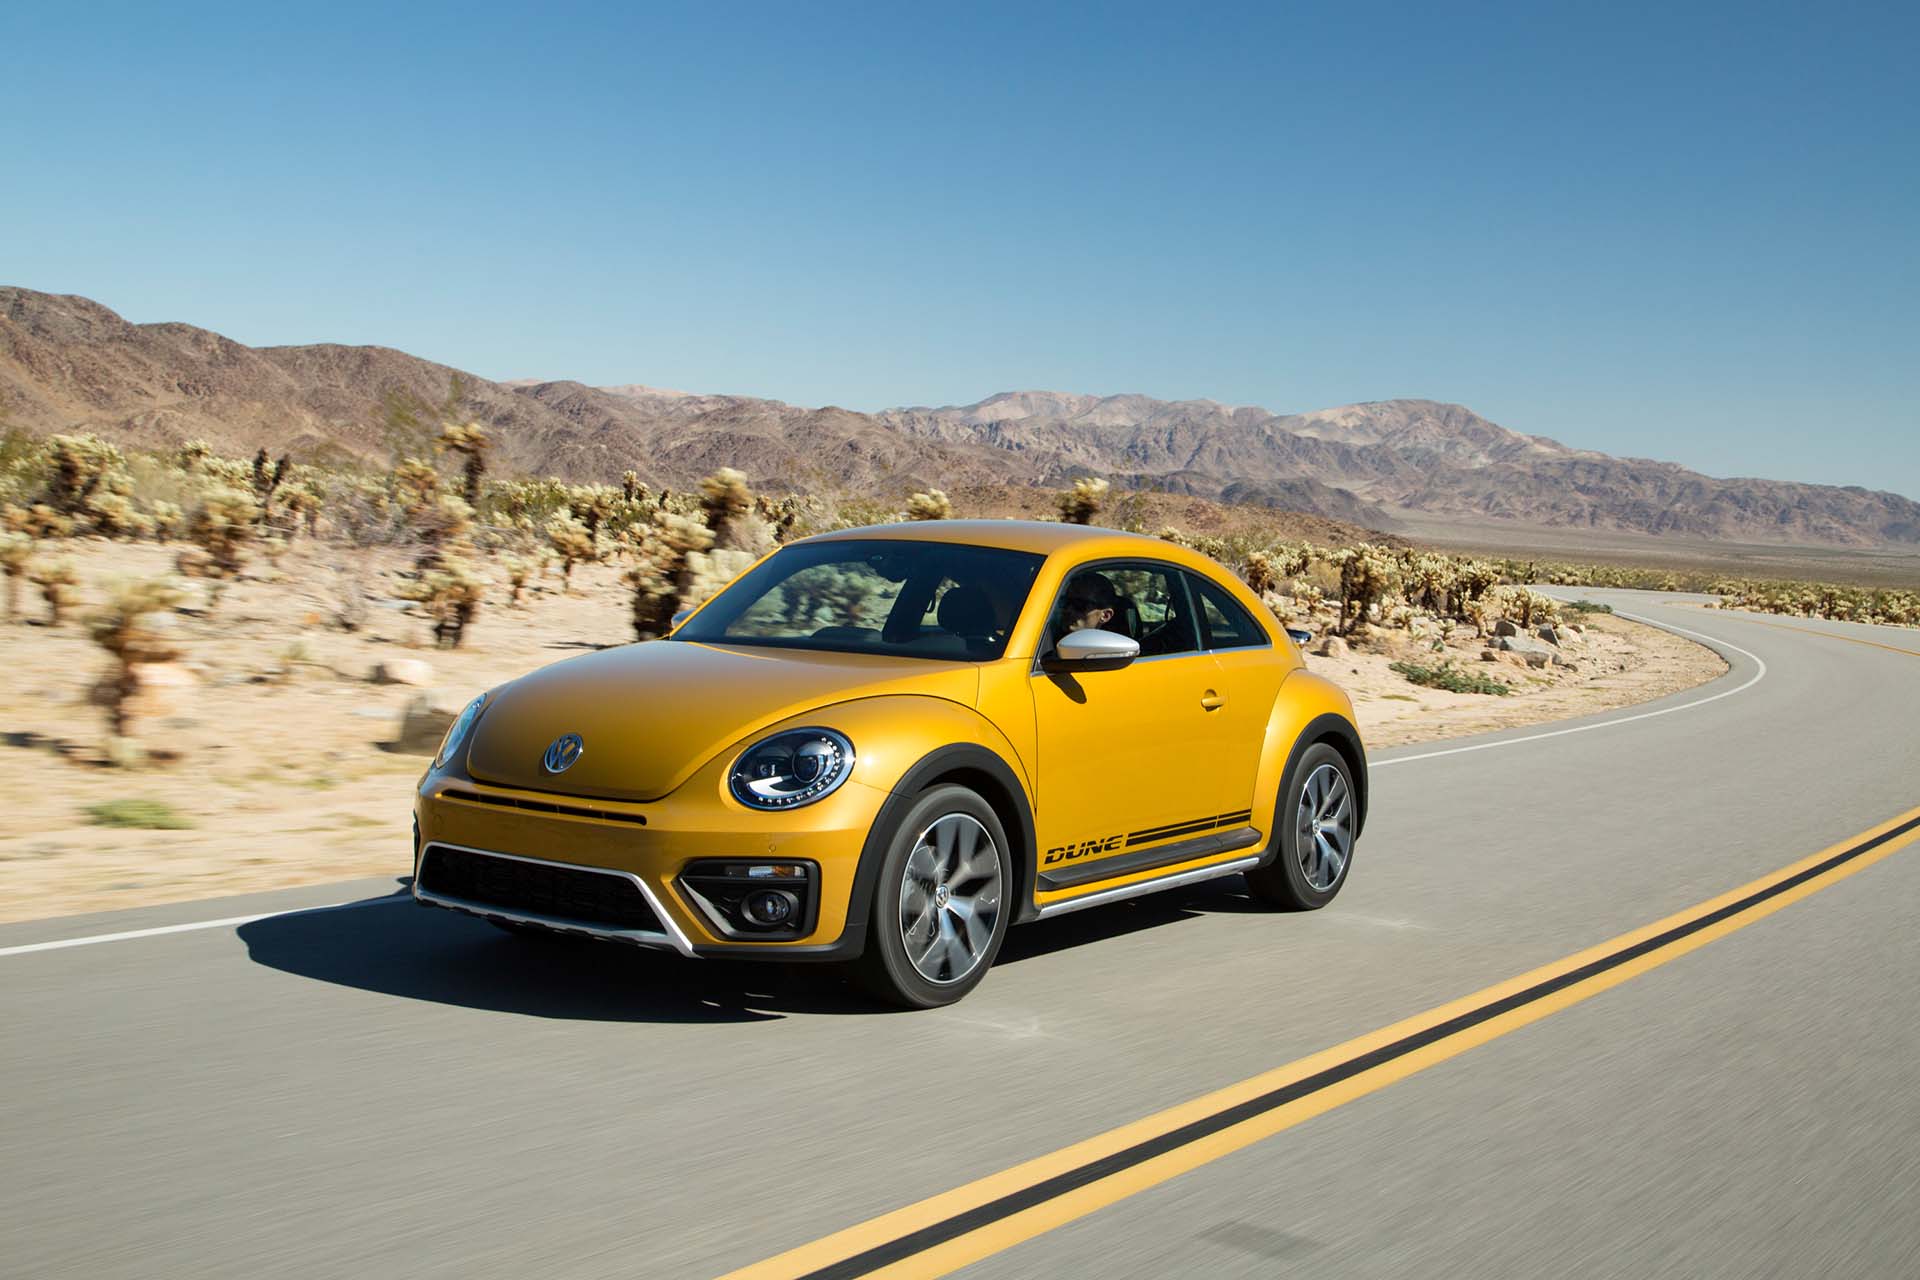 The Beetle Dune edition has very different origins inspired by the crazy, dusty, off-road dedicated Baja Bug. According to Joerg Sommer, Vice President Product Marketing and Strategy at Volkswagen of America Inc., “The new Dune successfully captures the iconic spirit of Baja Beetles, with a more rugged feel and amenities never before offered on the third-generation Beetle.”